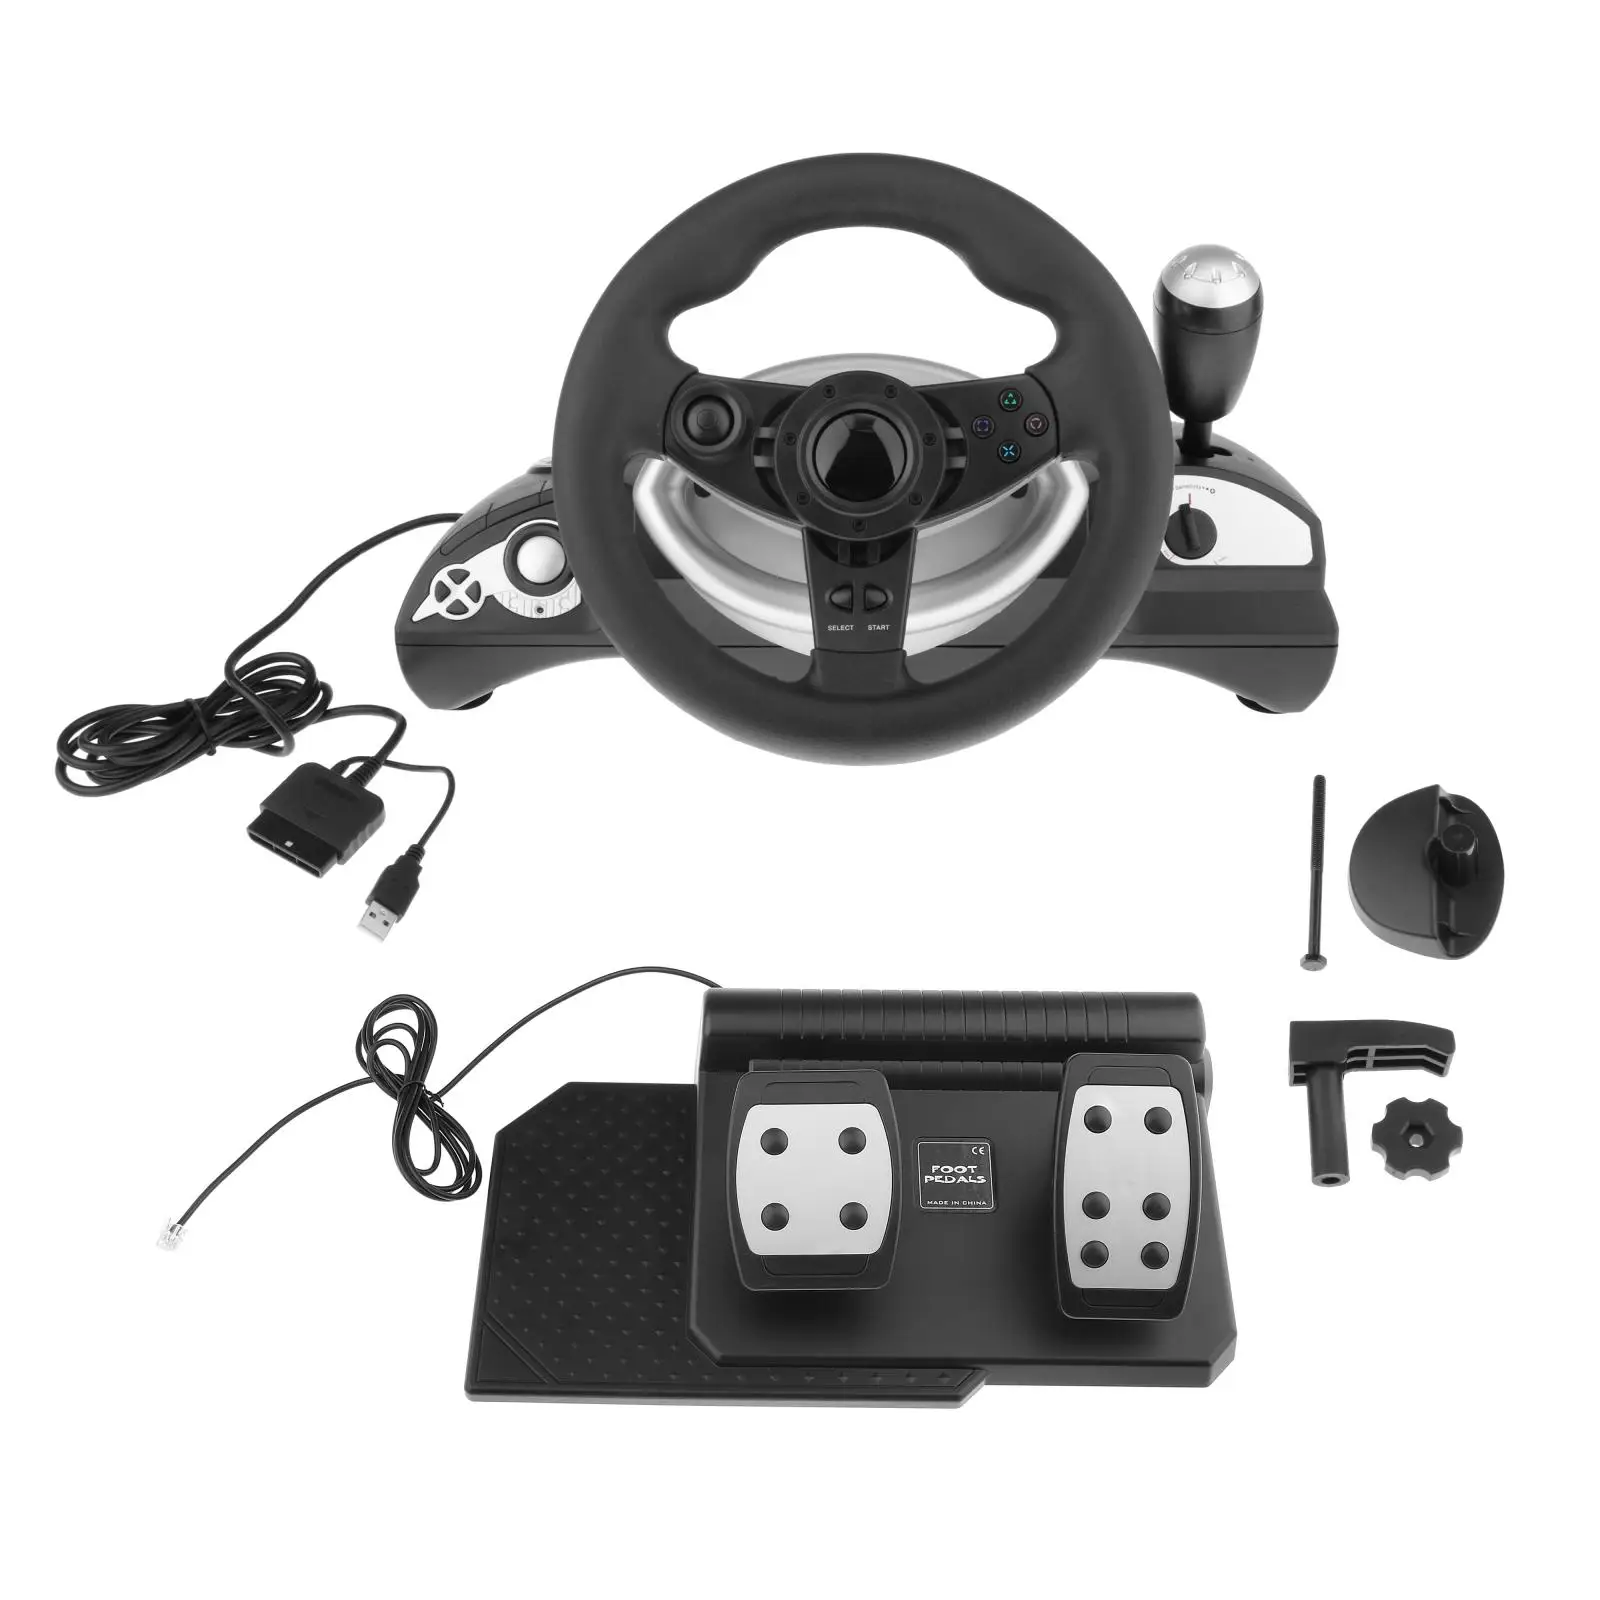 Racing Wheel, 270 degree Universal Usb Car Racing Game Steering Wheel with Pedal for PS3/PS2 console